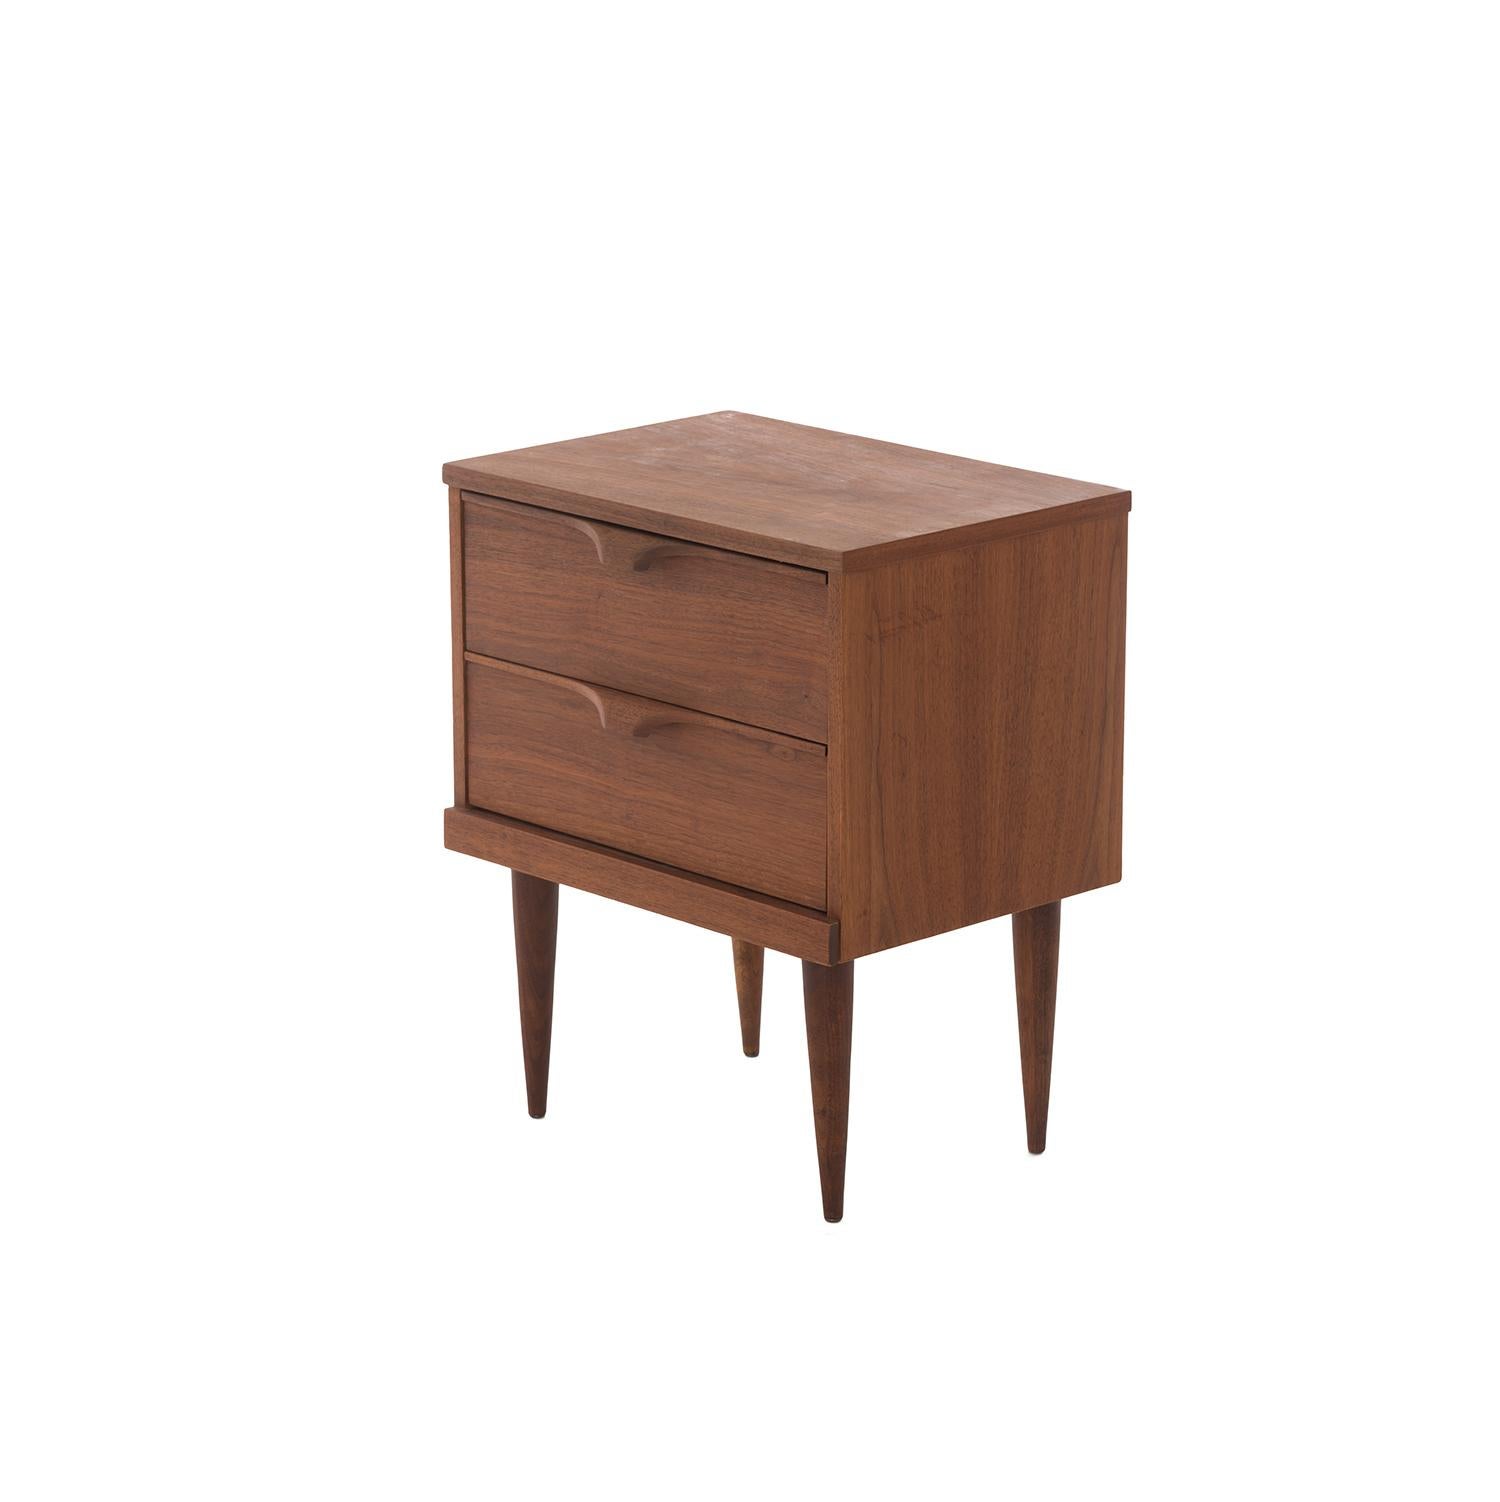 This midcentury walnut occasional chest has two deep drawers for storing anything you need. Solid carved wood finger pulls add a simple modern flair.

Professional, skilled furniture restoration is an integral part of what we do every day. Our